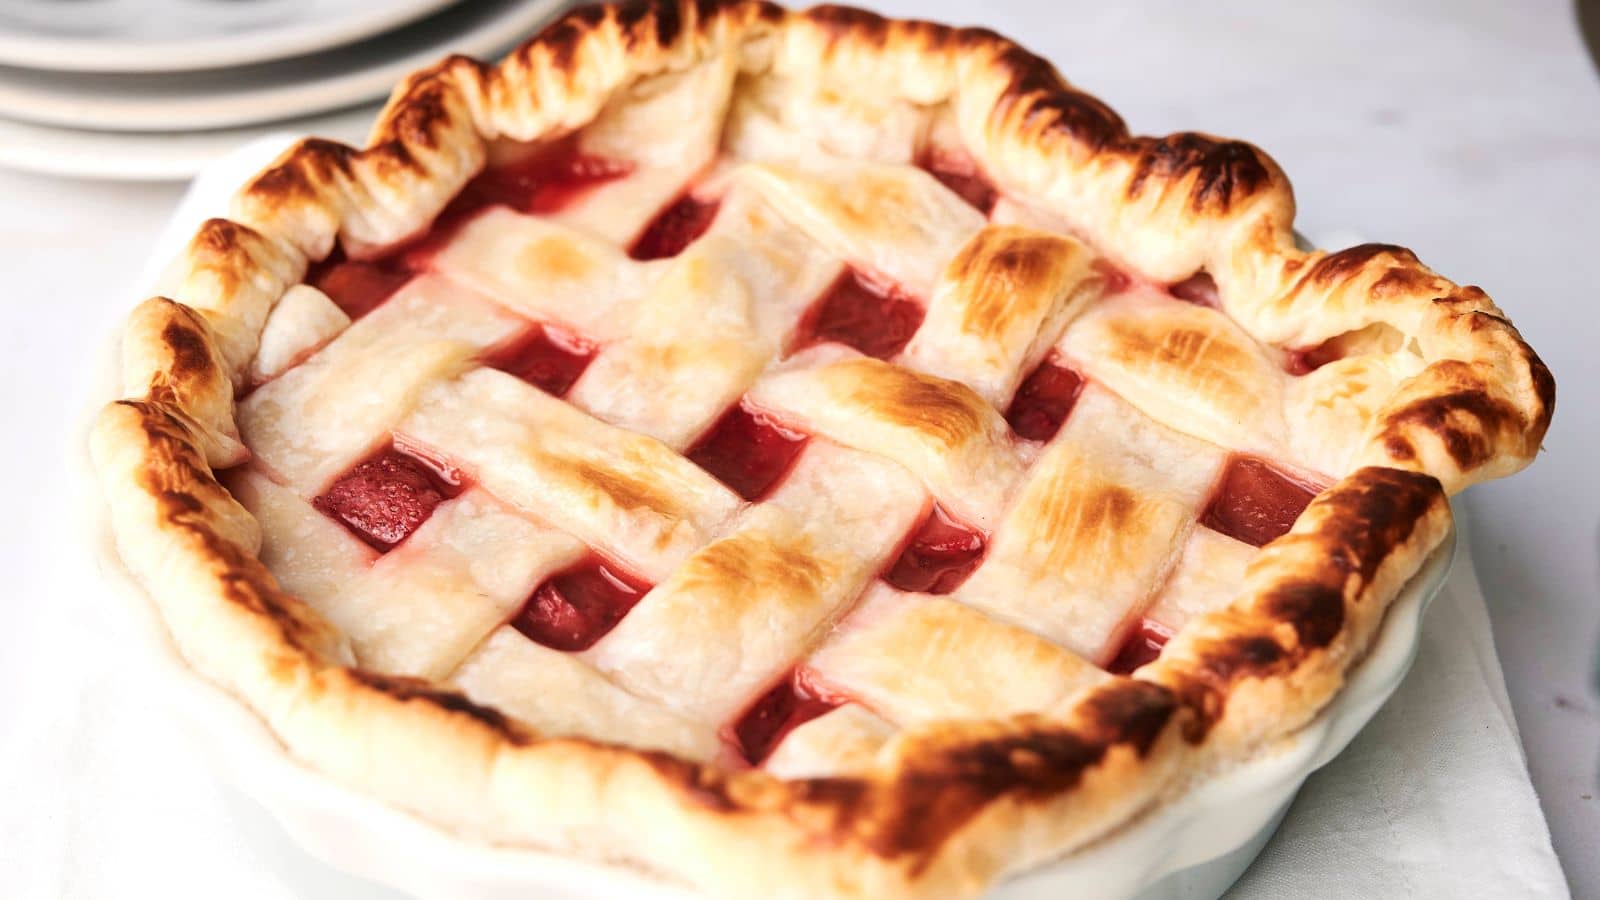 A baked strawberry rhubarb pie with a golden-brown lattice crust, displaying visible red filling through the gaps, set on a light-colored surface.